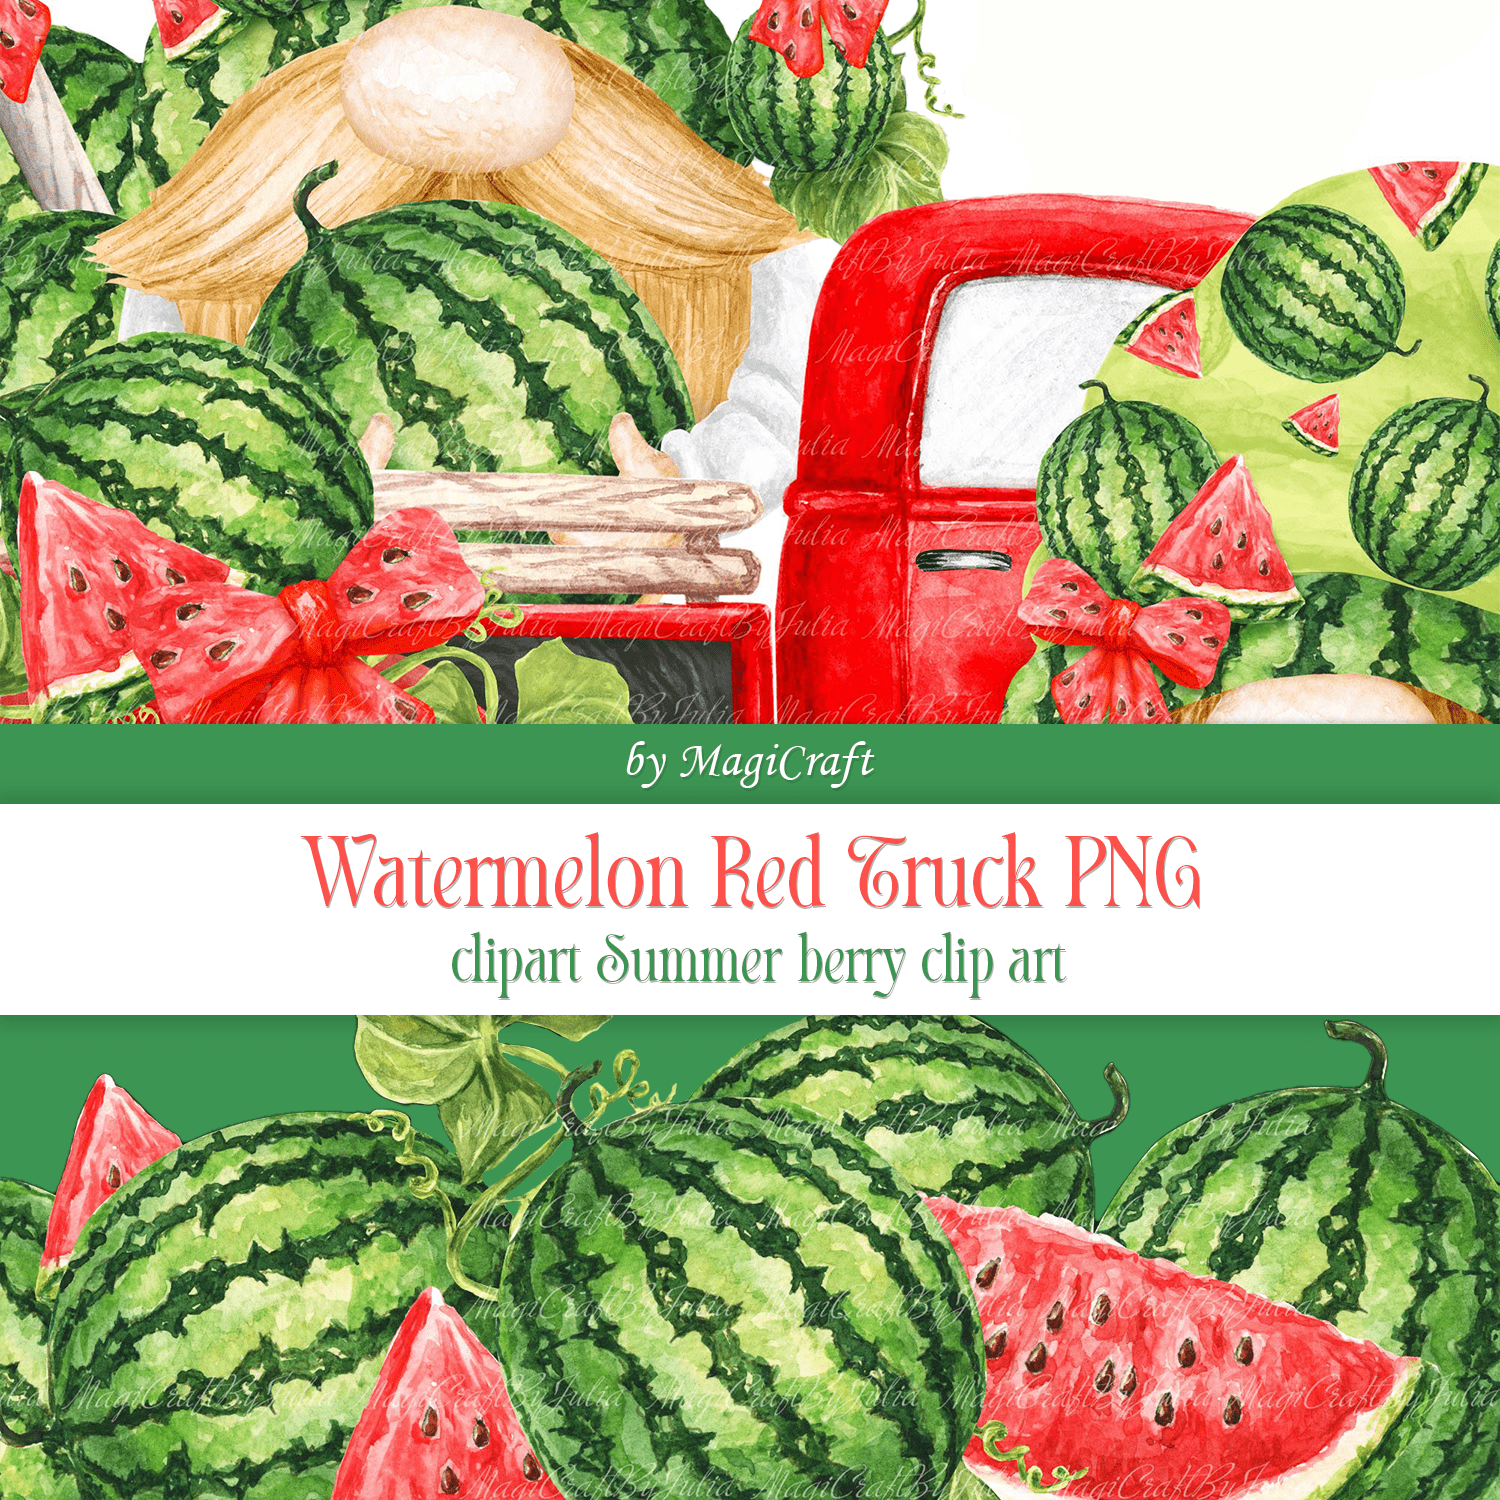 Watermelon Red Truck PNG clipart created by MagiCraft.